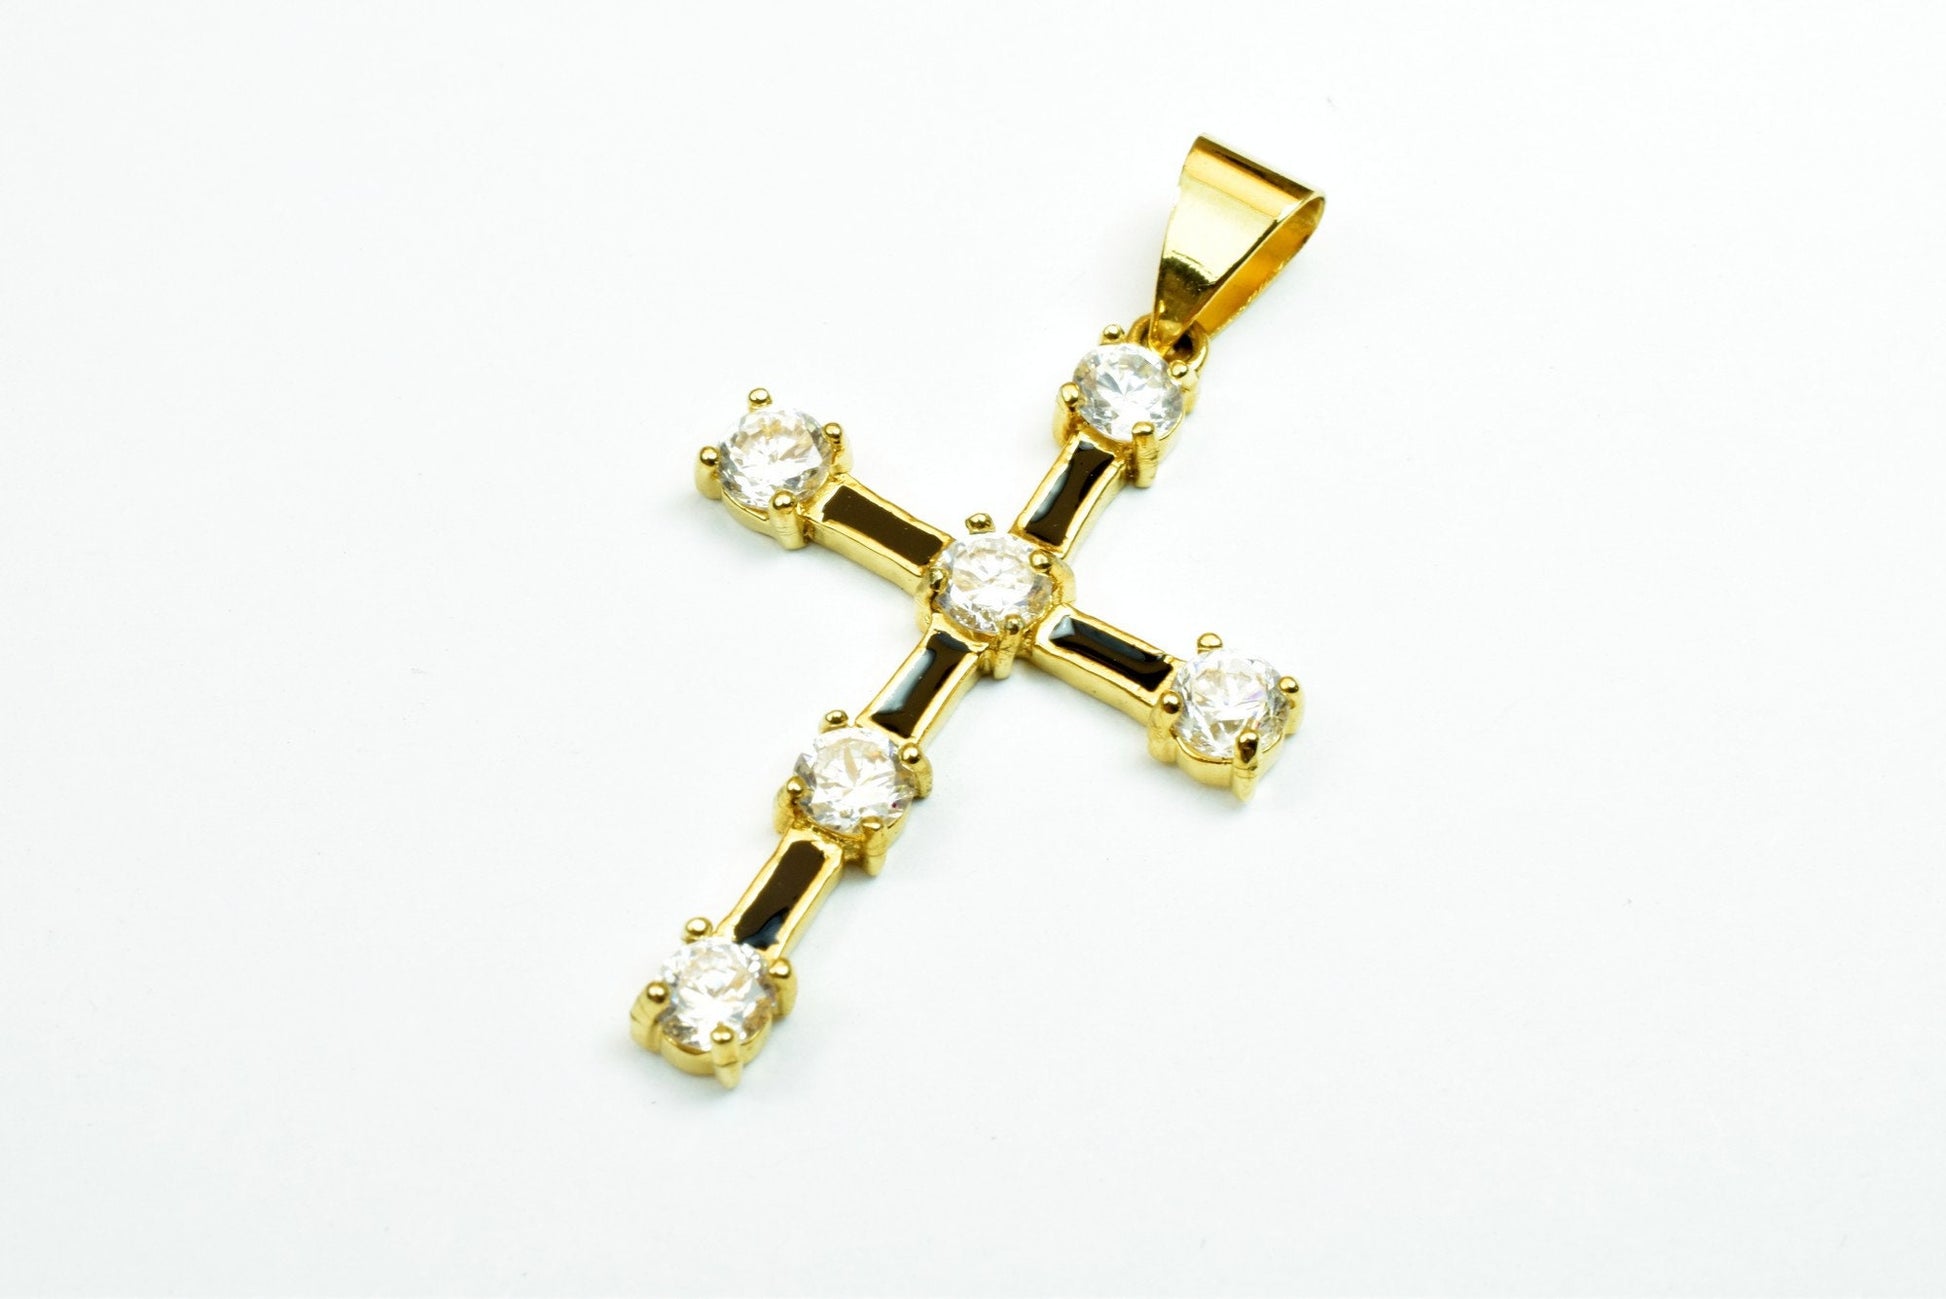 18K as Gold Filled* Black Cross Pendant With Rhinestone CZ Cubic Zirconia Size 42x38mm Christian Religious Charm For Jewelry Making